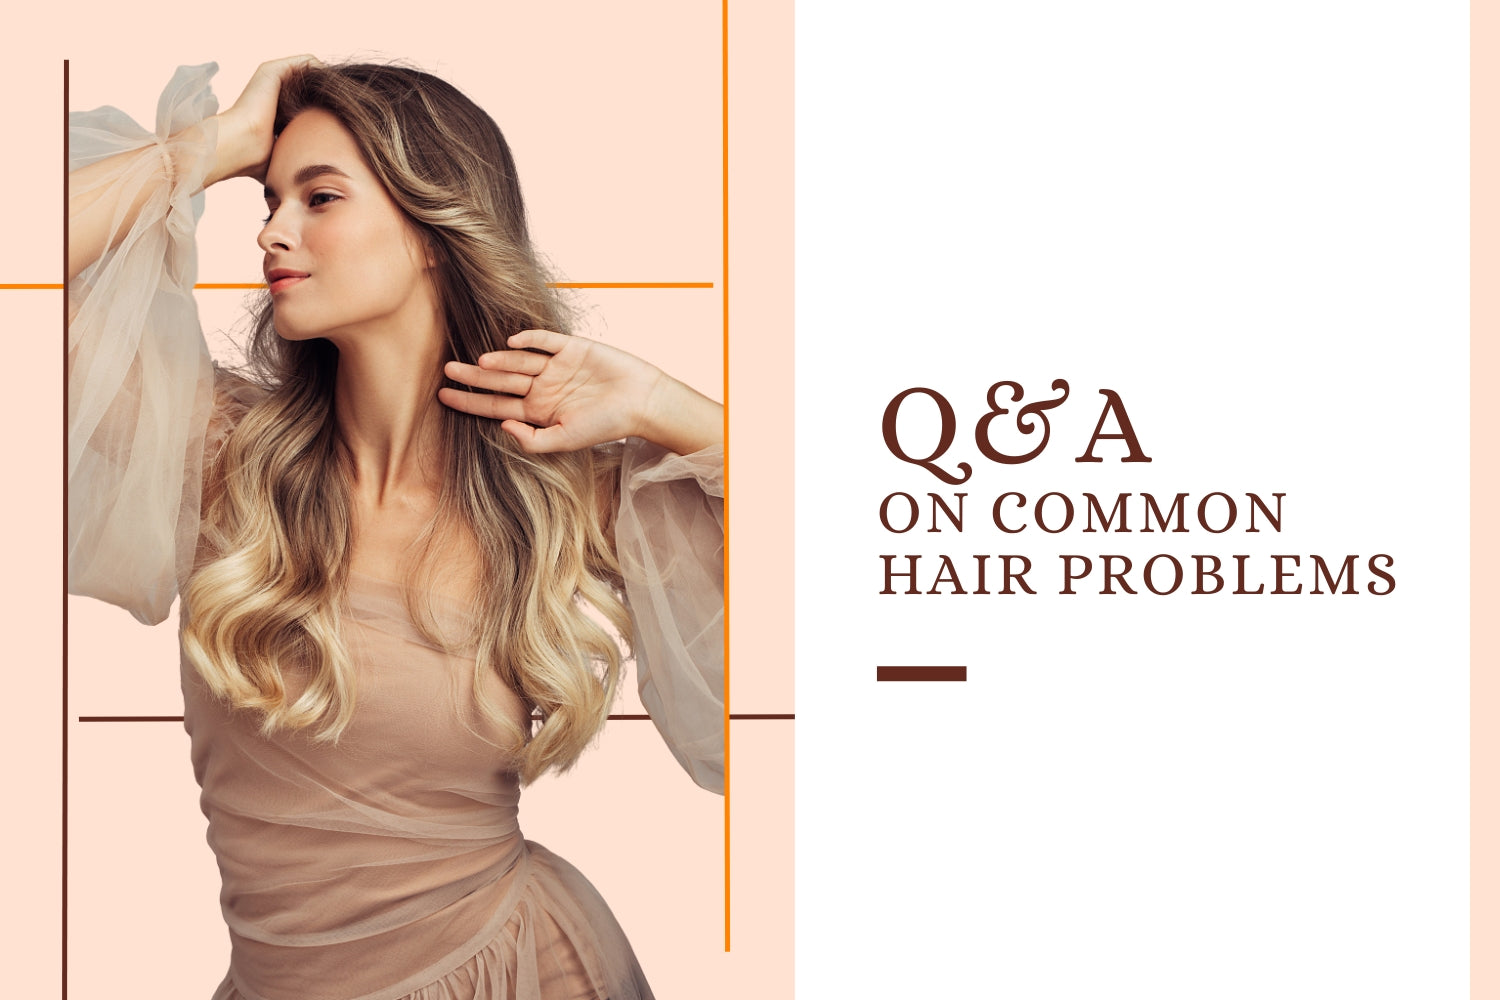 Q&A on Common Hair Problems